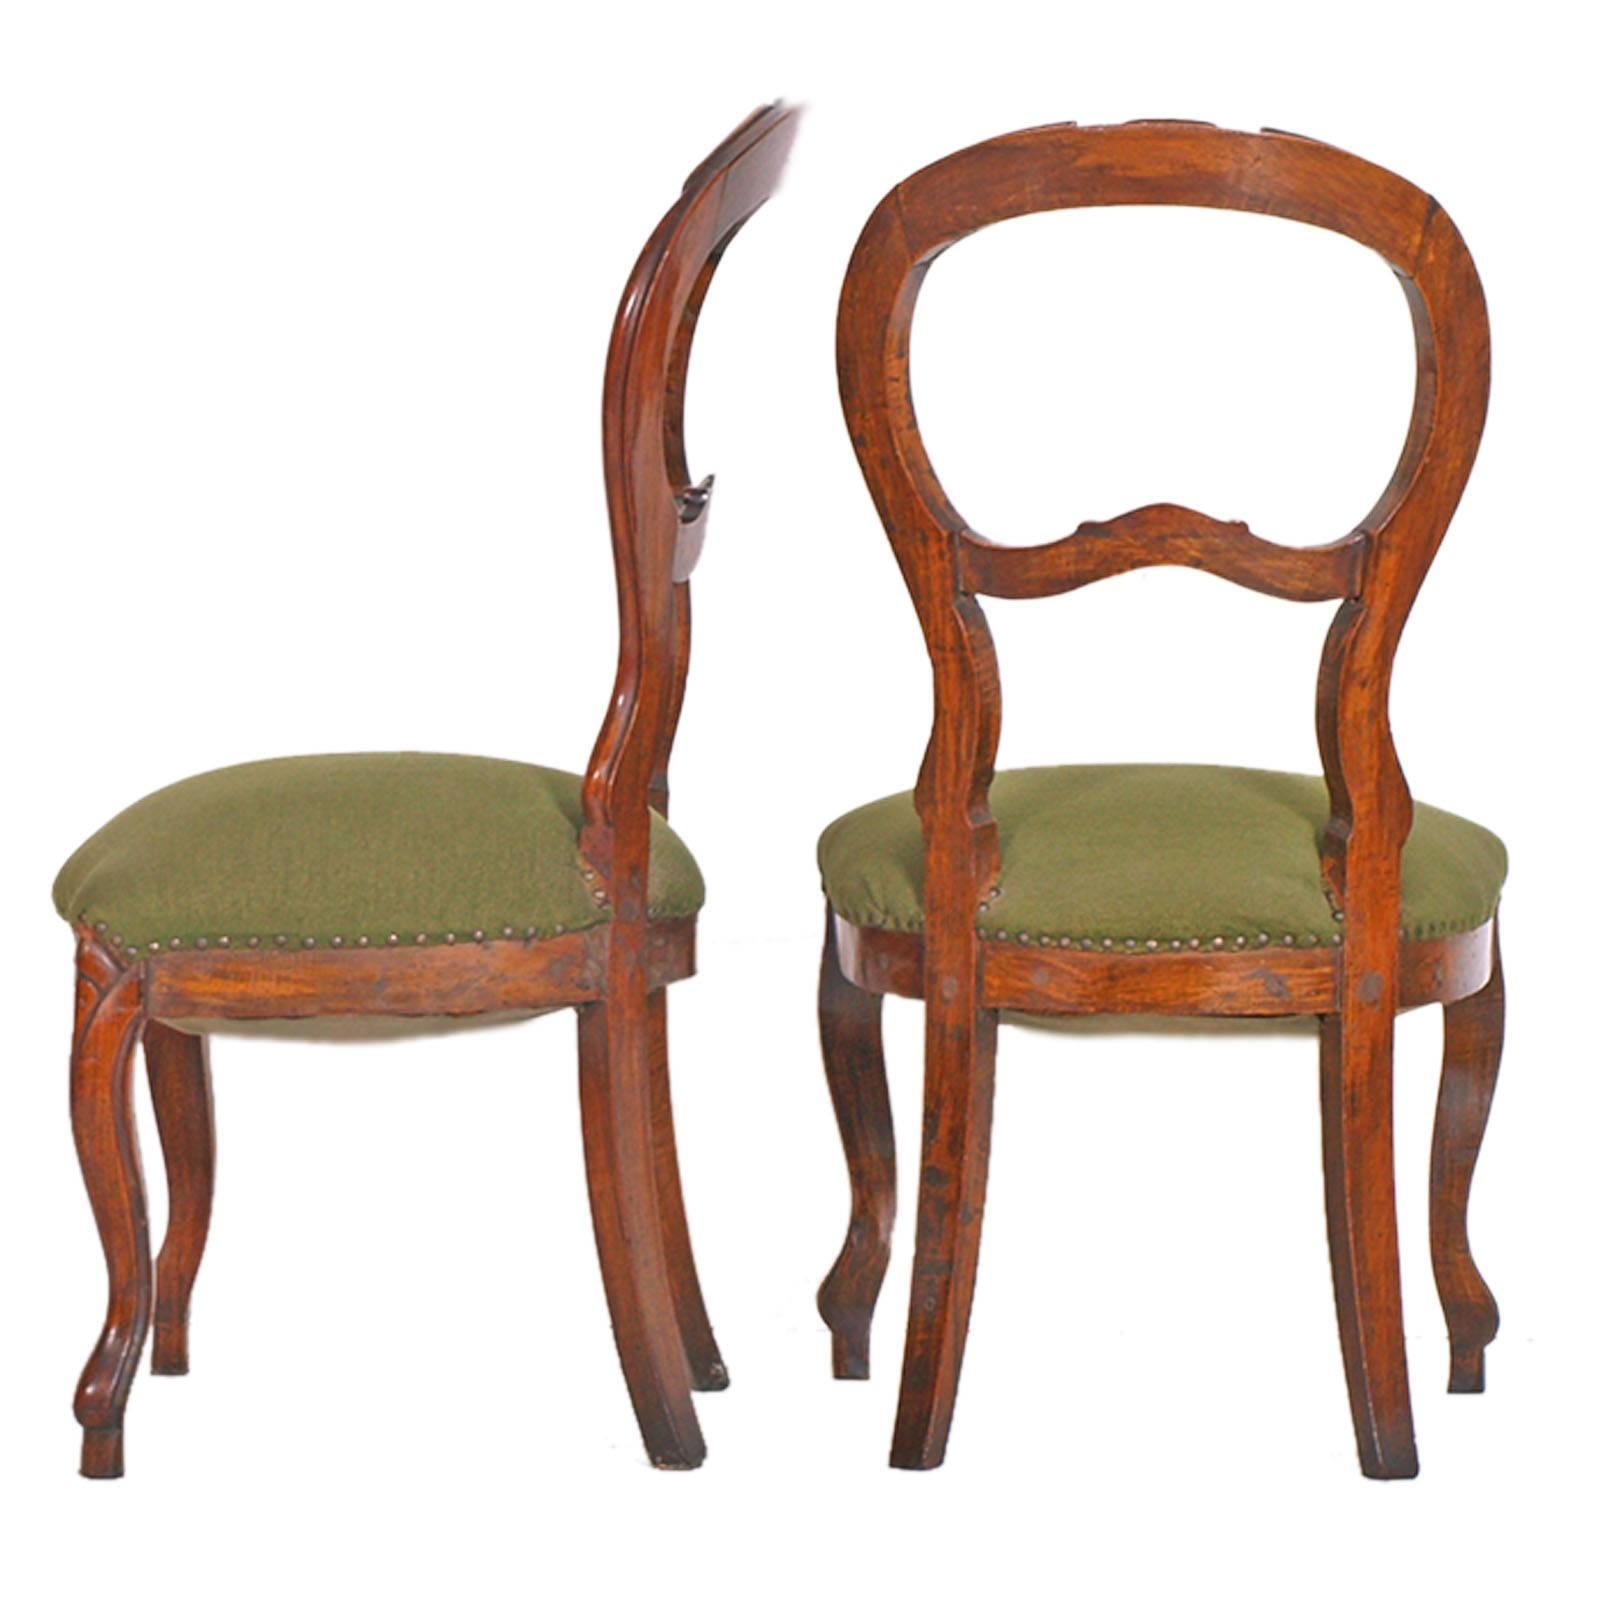 Italian Pair of 19th Century Baroque Side Chairs, Hand-Carved Walnut, Velvet Upholstery